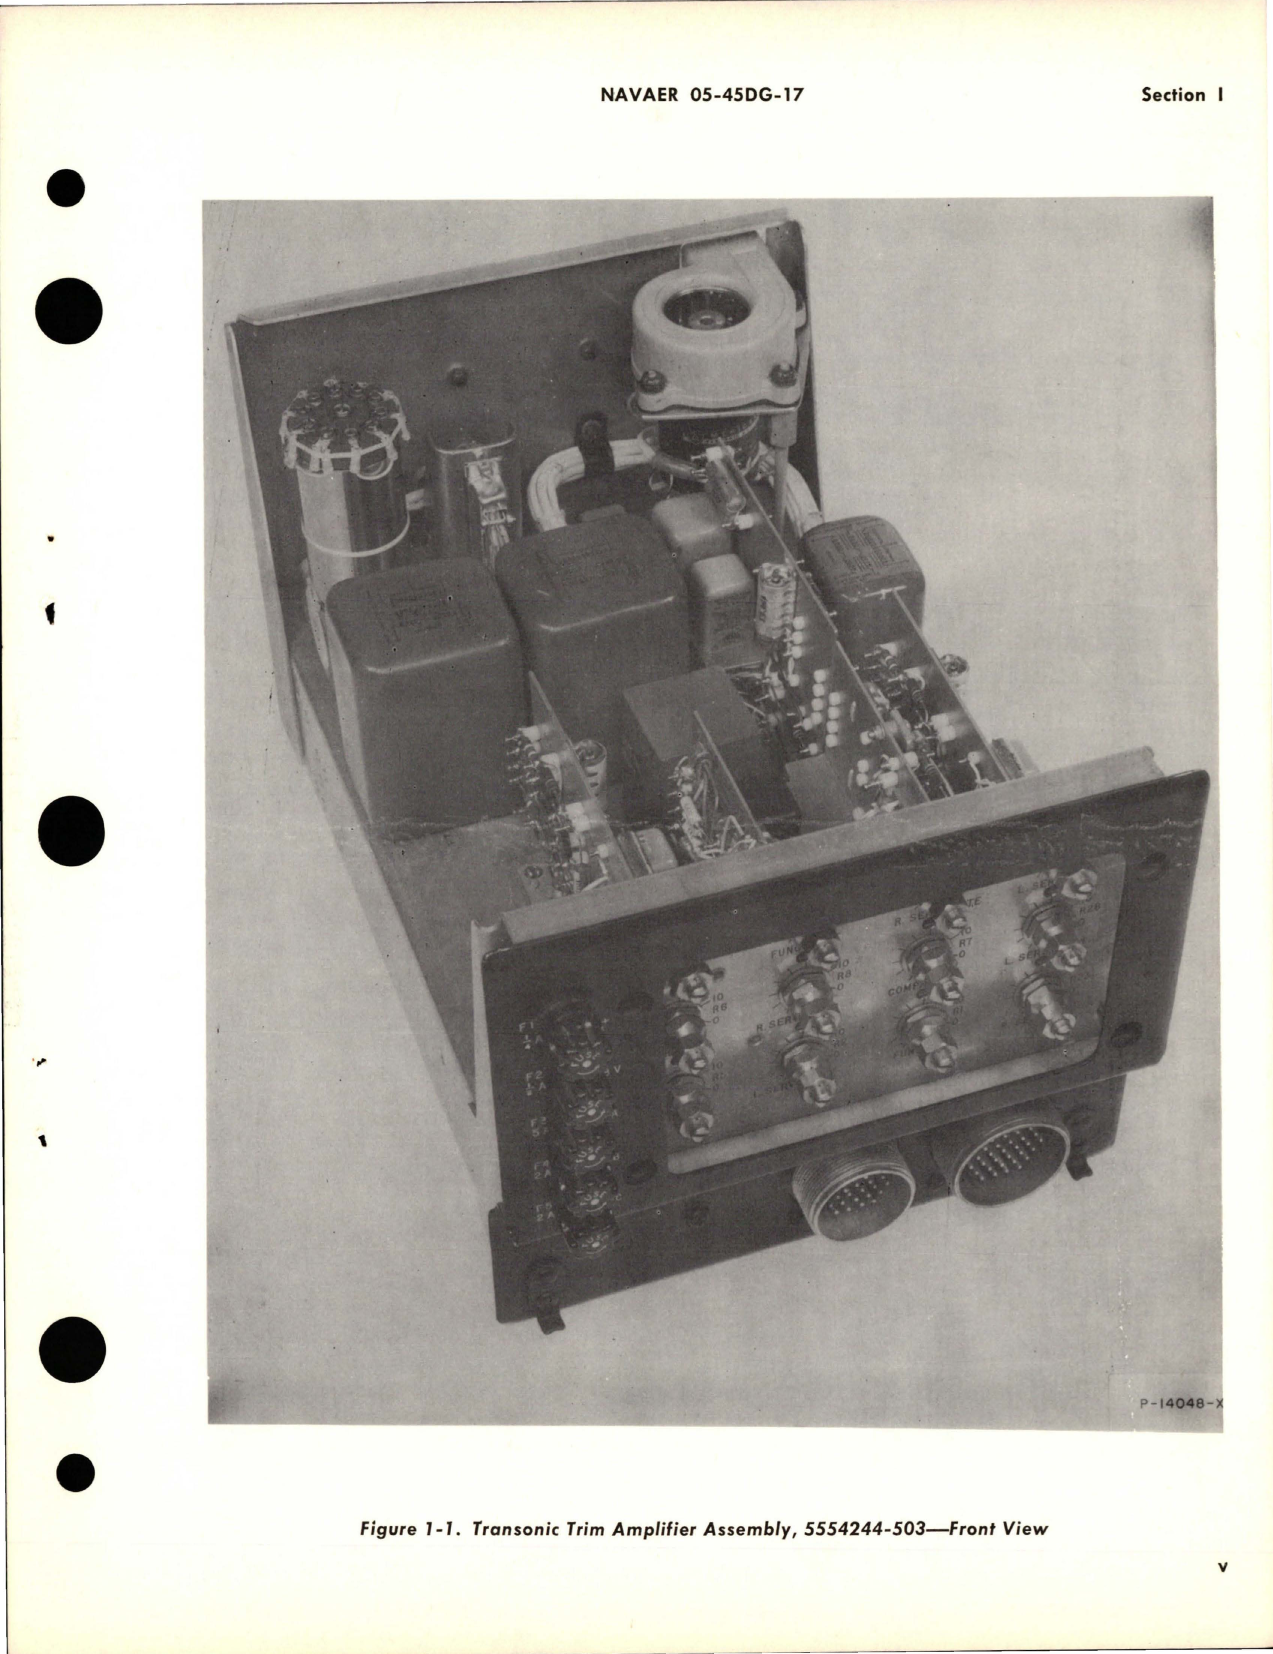 Sample page 7 from AirCorps Library document: Overhaul Instructions for Transonic Trim Amplifier Assembly - Parts 5554244-503, 5554244-507, and 554244-509